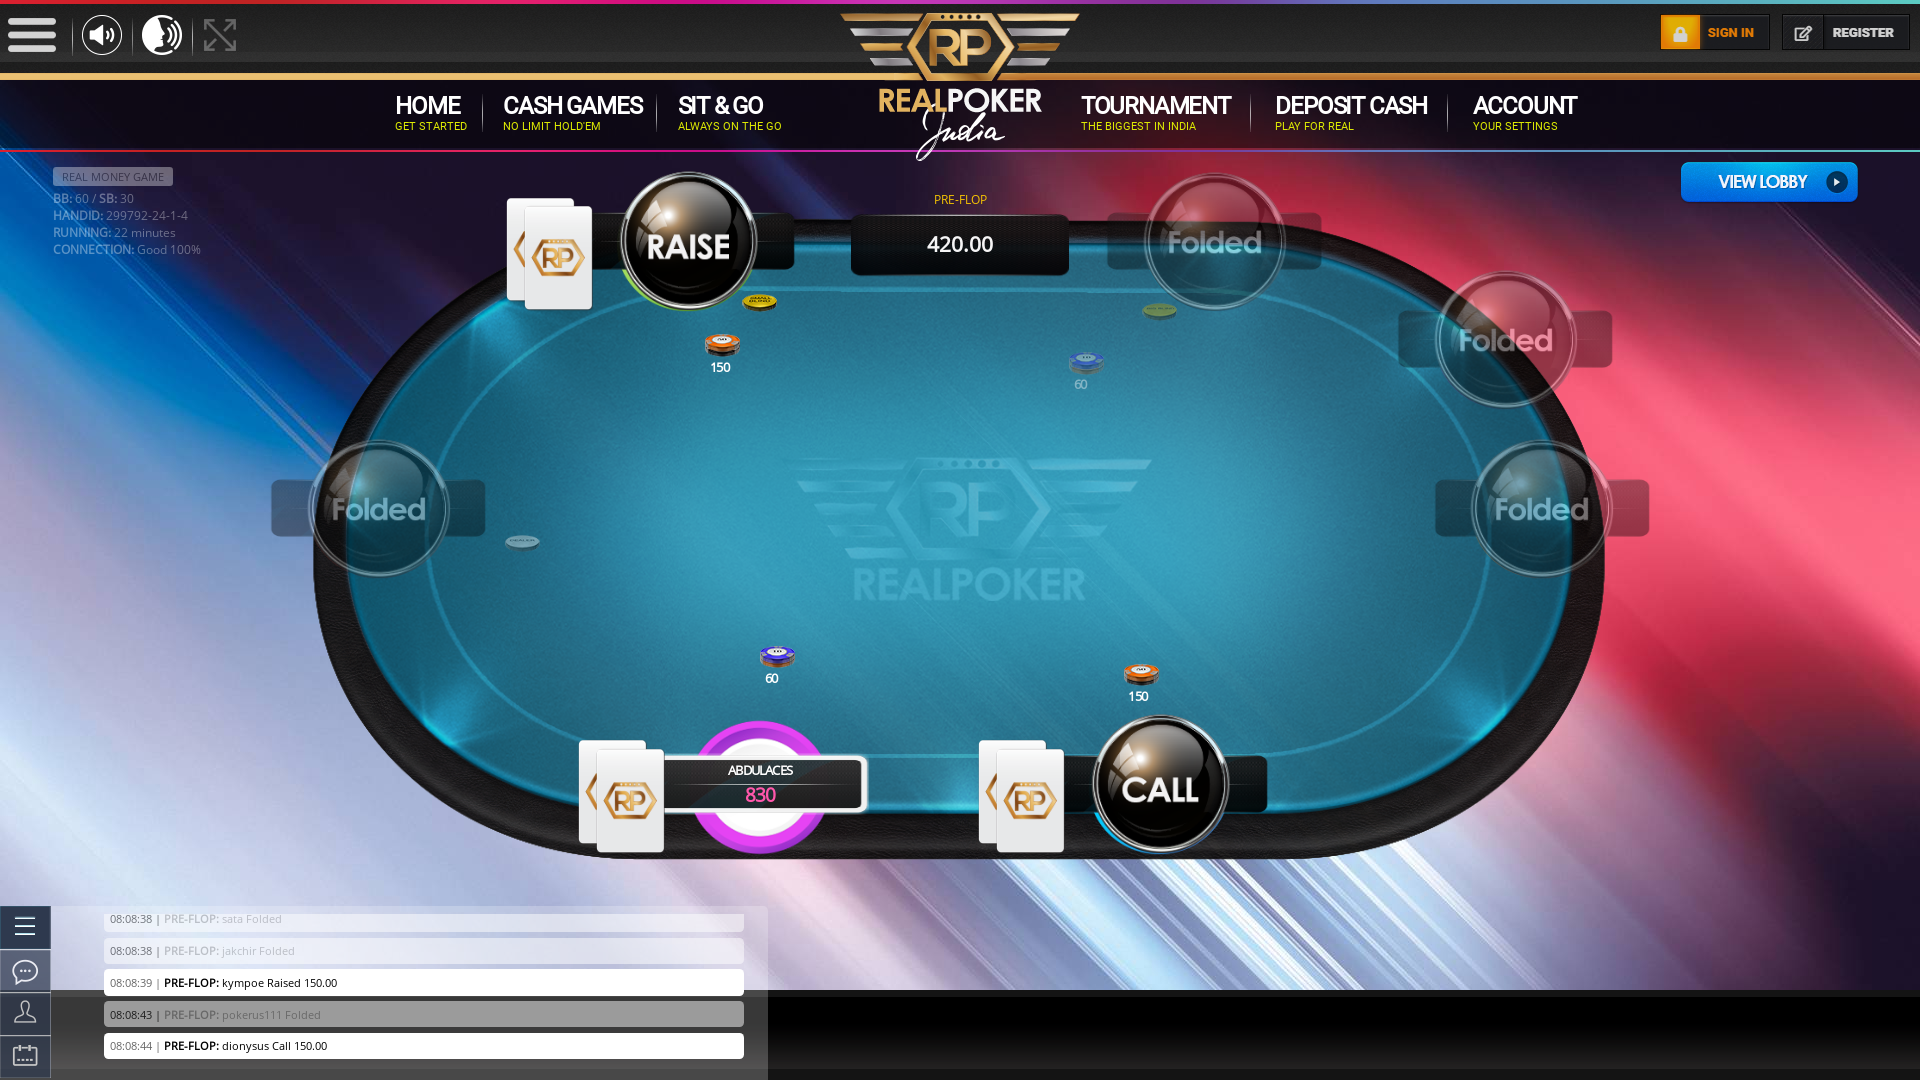 Real poker 10 player table in the 22nd minute